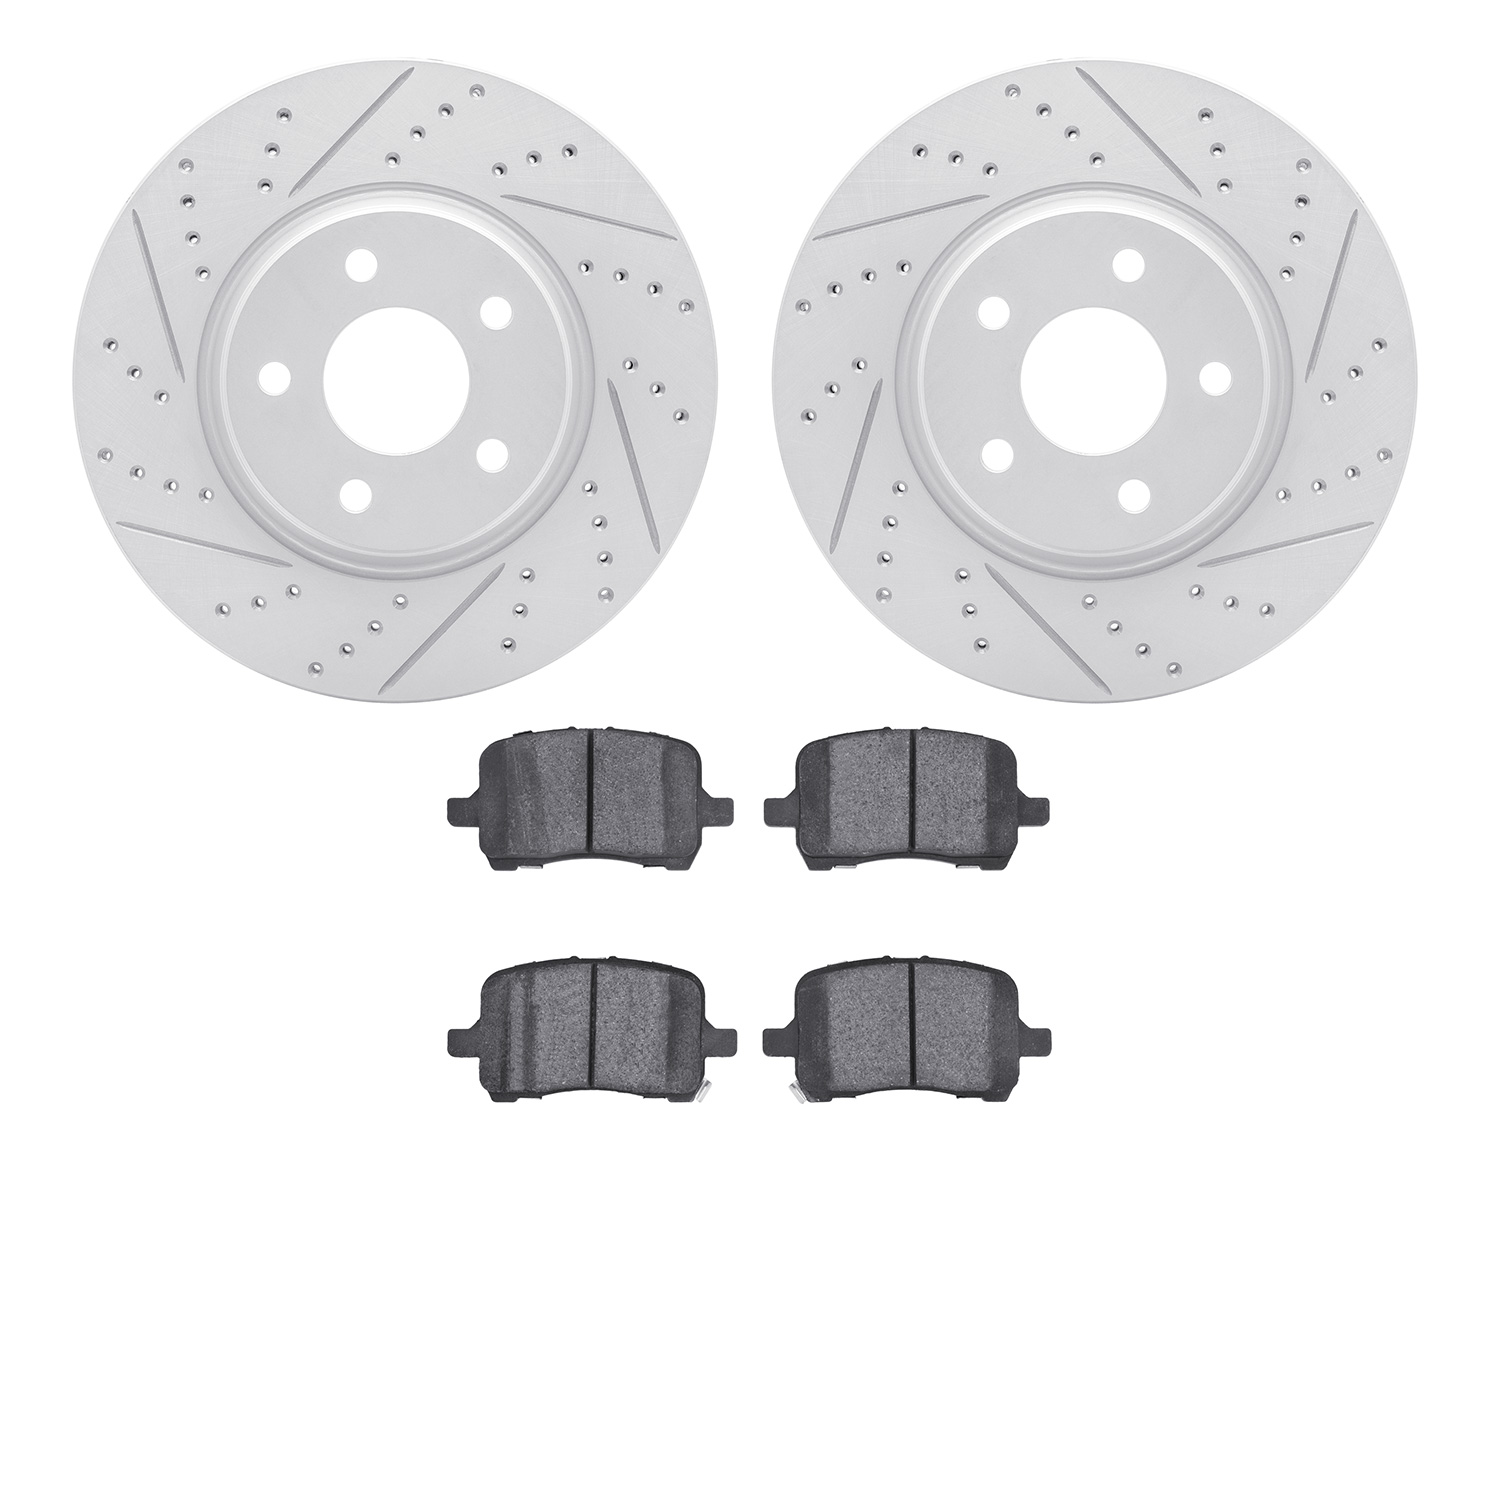 2502-53003 Geoperformance Drilled/Slotted Rotors w/5000 Advanced Brake Pads Kit, 2004-2012 GM, Position: Front